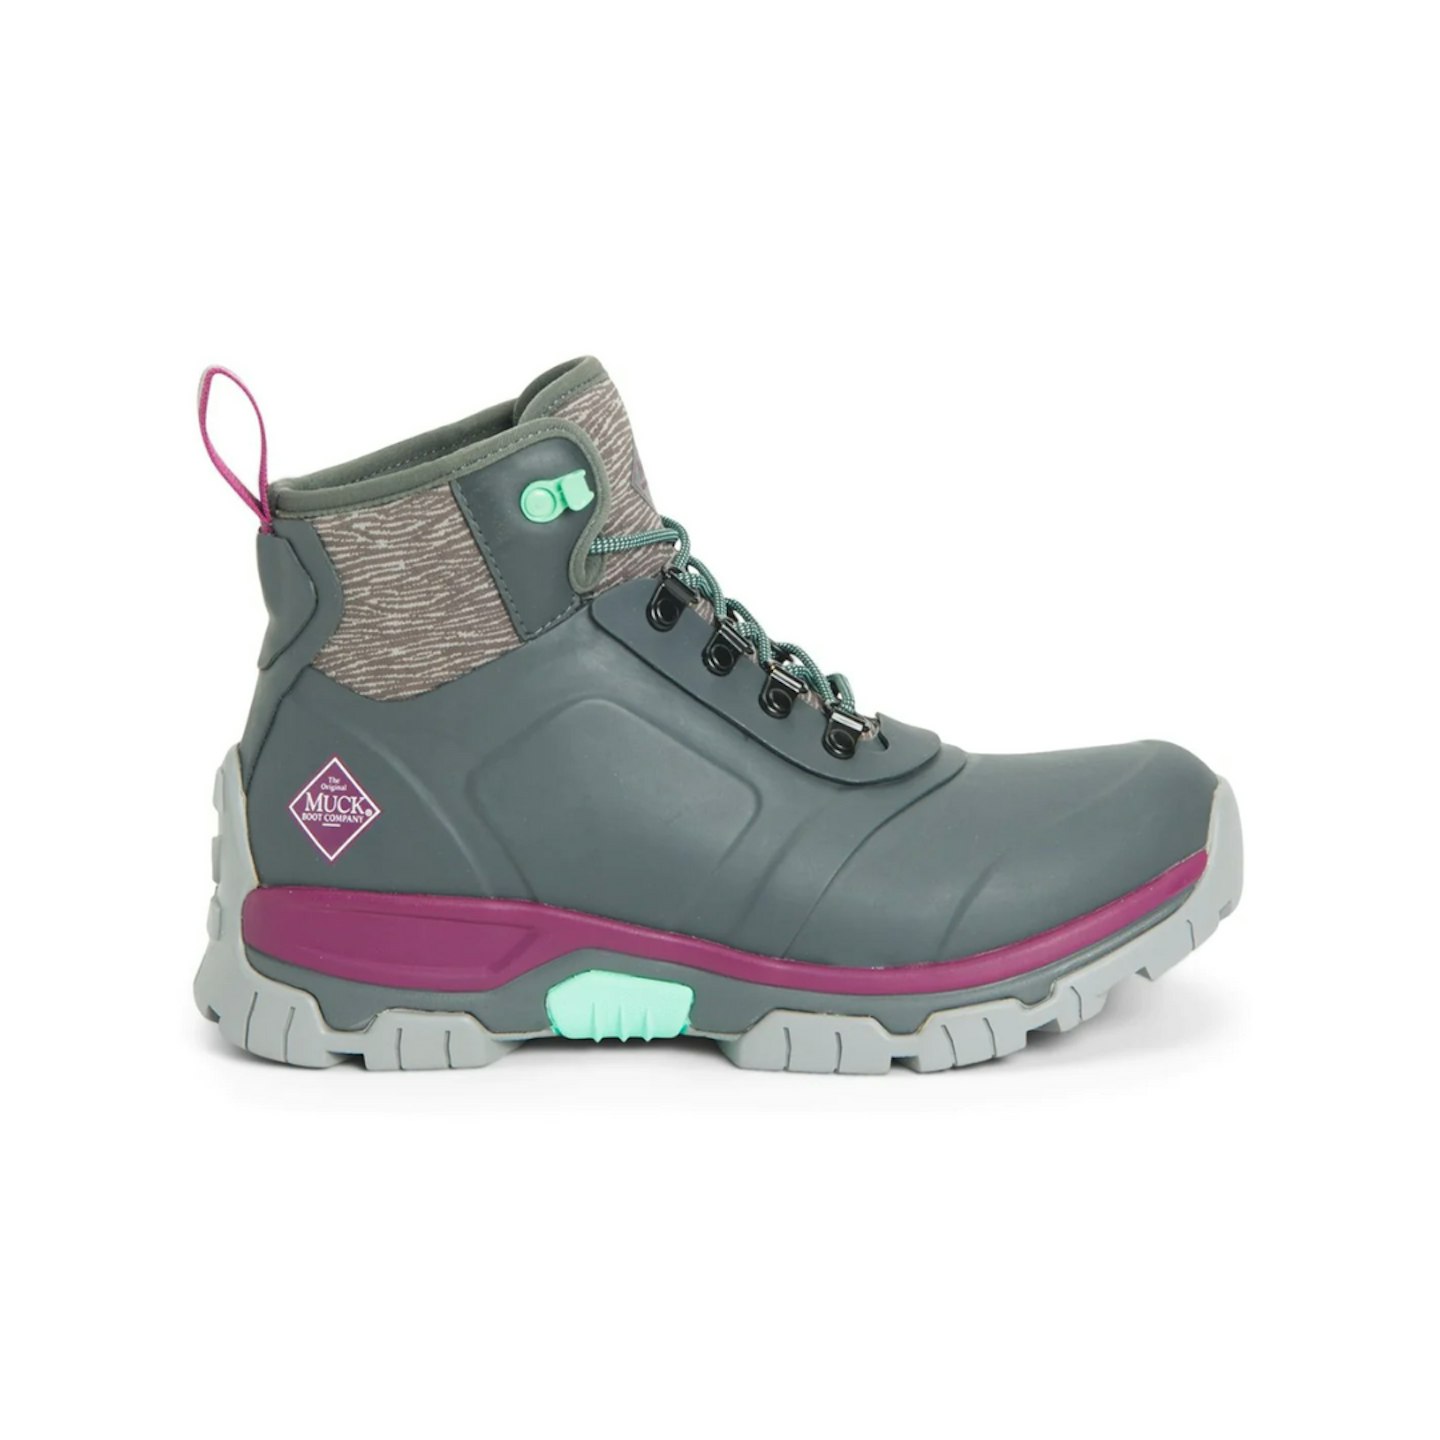 The Best Walking Boots For Women For Style And Support